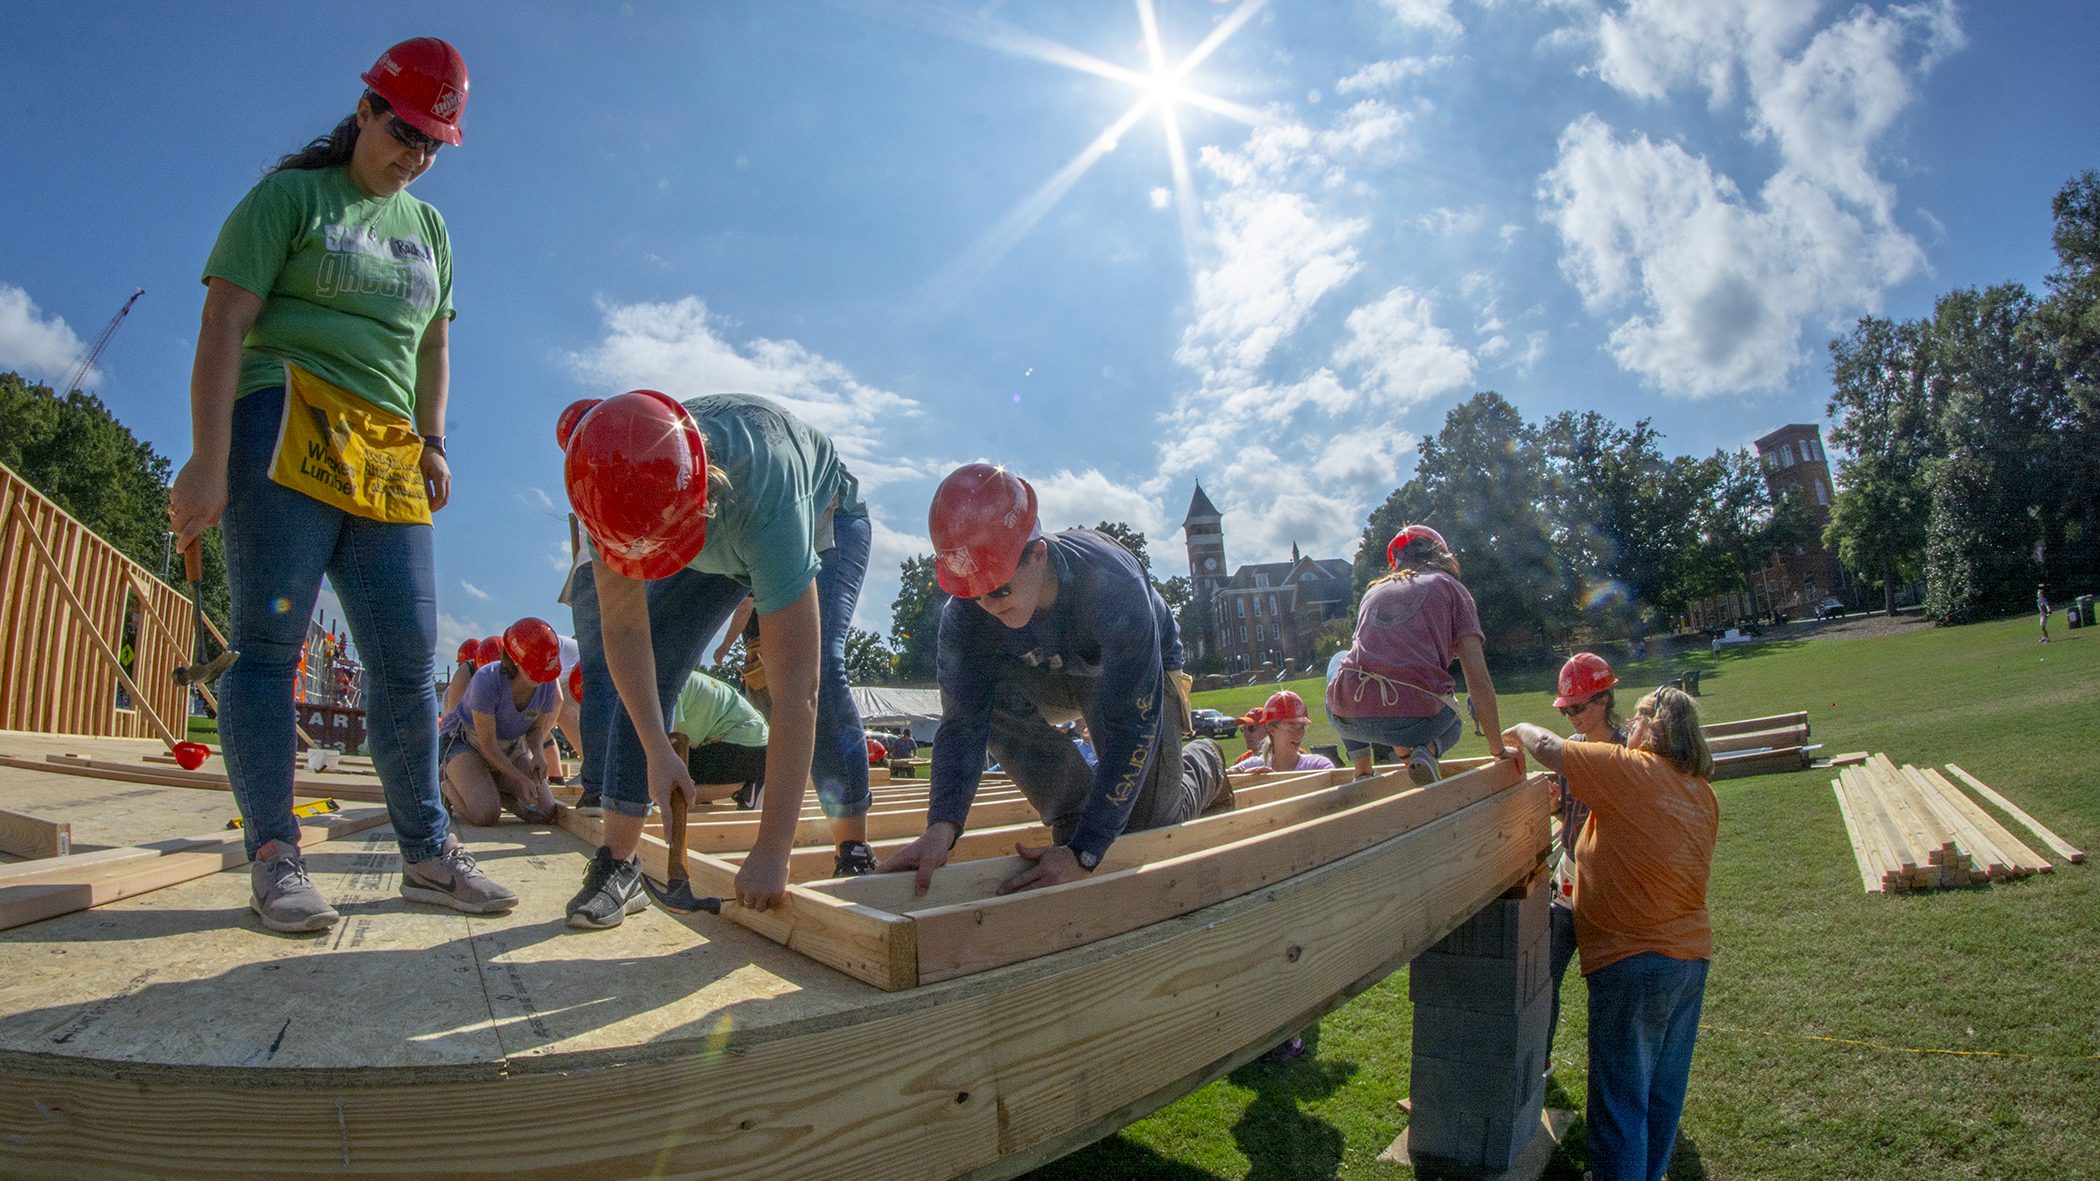 Clemson University students build a house for Habitat for Humanity on Bowman Field as part of Tigerama, Clemson’s homecoming event, Oct. 15, 2018. This was the 25th year student volunteers built a Habitat for Humanity house during homecoming.